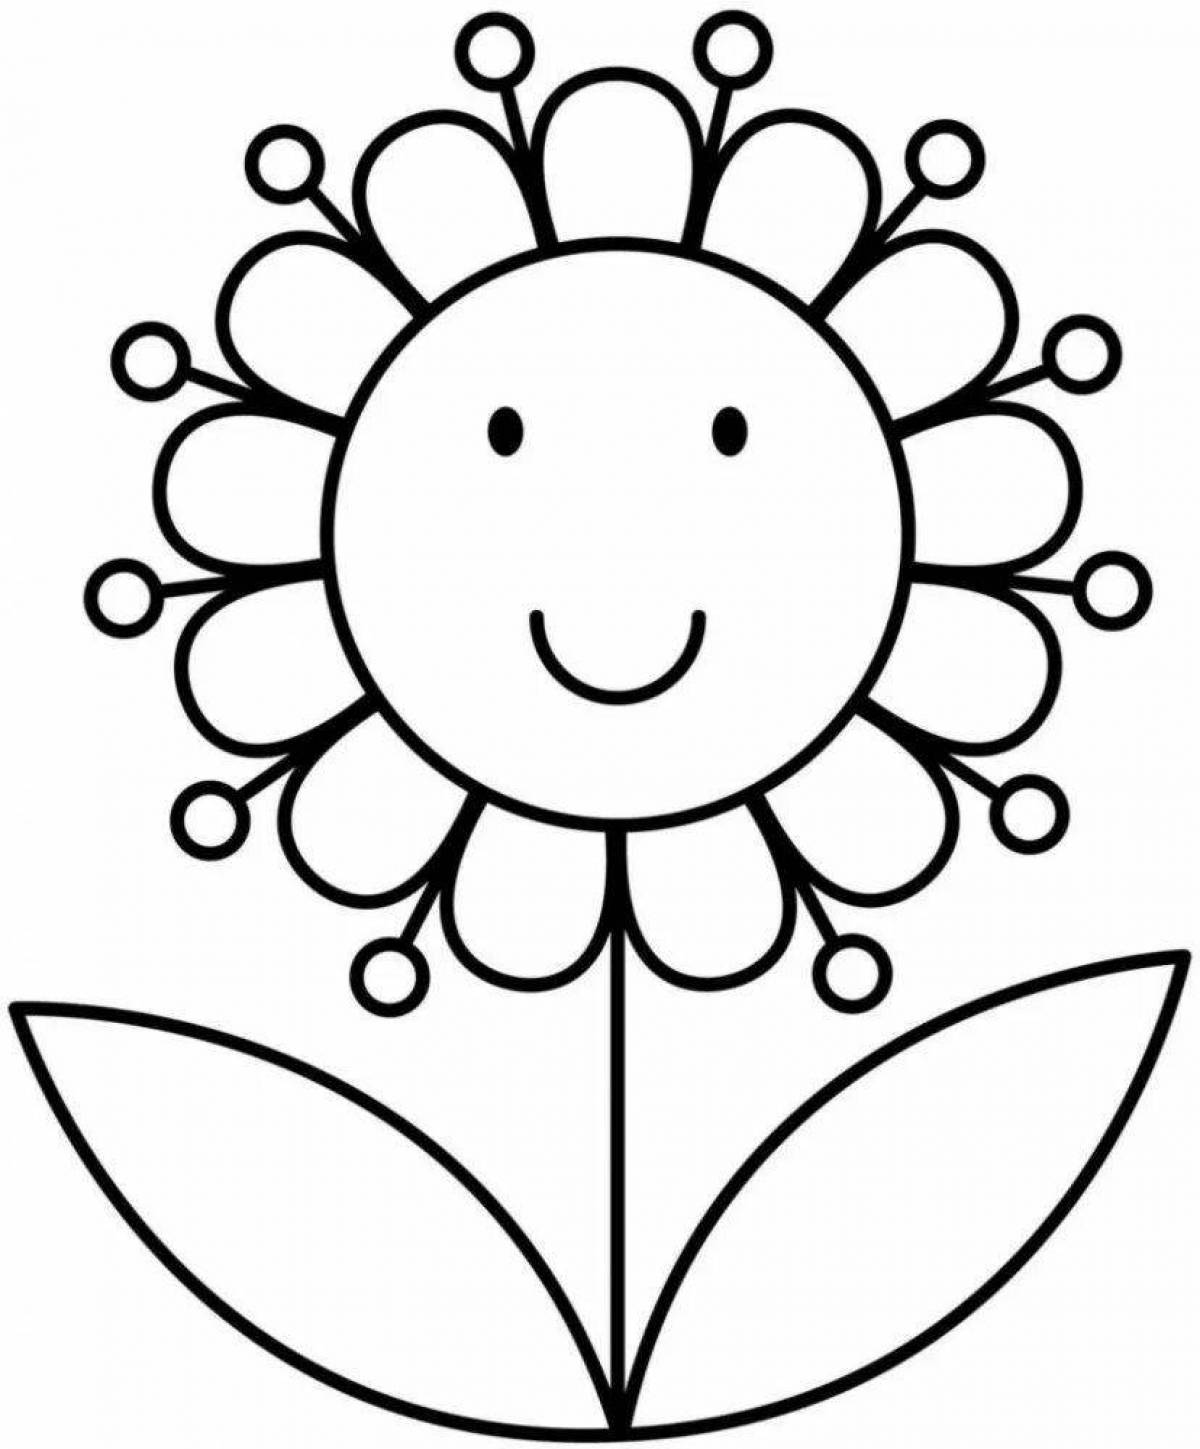 Playful flower coloring book for 2-3 year olds